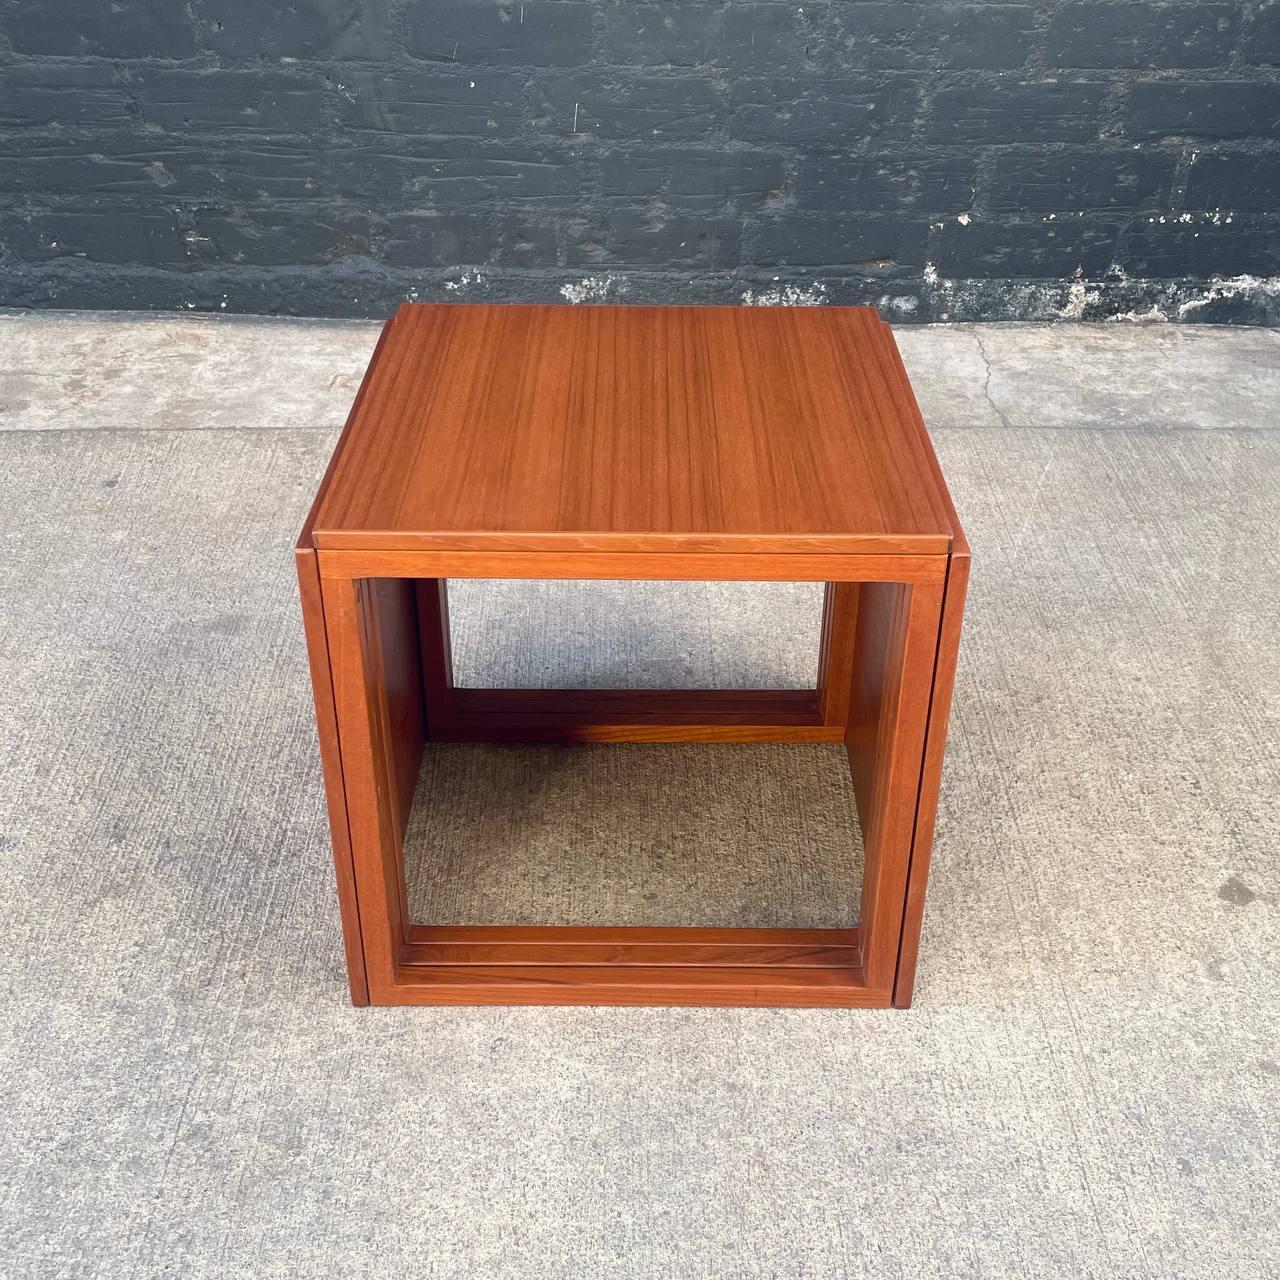 Set of Mid-Century Danish Modern Teak Cube Nesting Tables by Kai Kristiansen In Good Condition For Sale In Los Angeles, CA